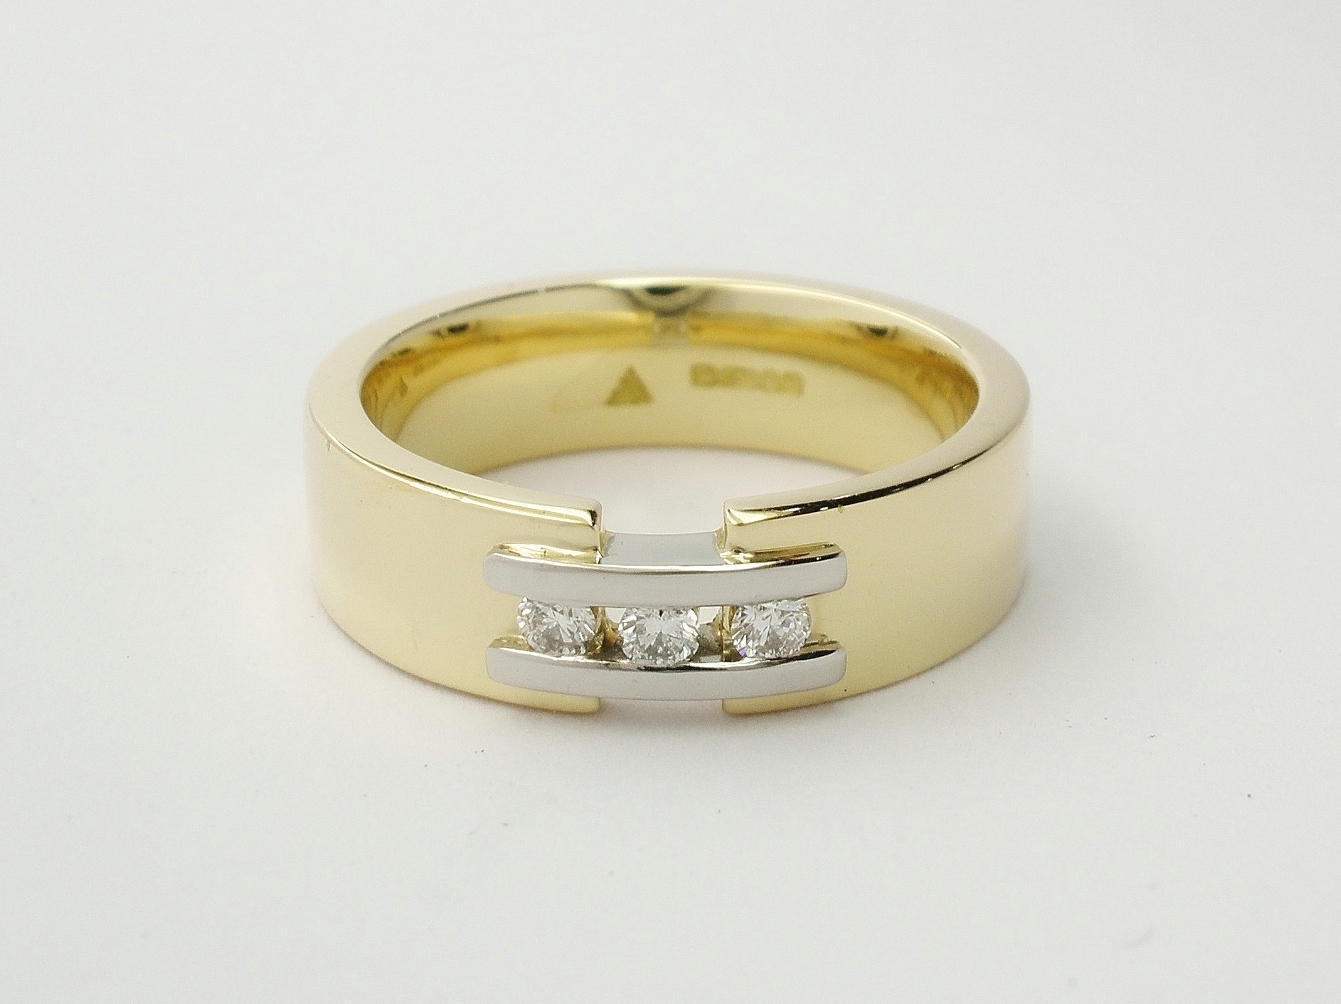 Ladies' 18ct. yellow gold wedding ring with a pair of platinum 'tram line' wires inlayed & bridging a gap across the top, set with 3 round brilliant cut diamonds.